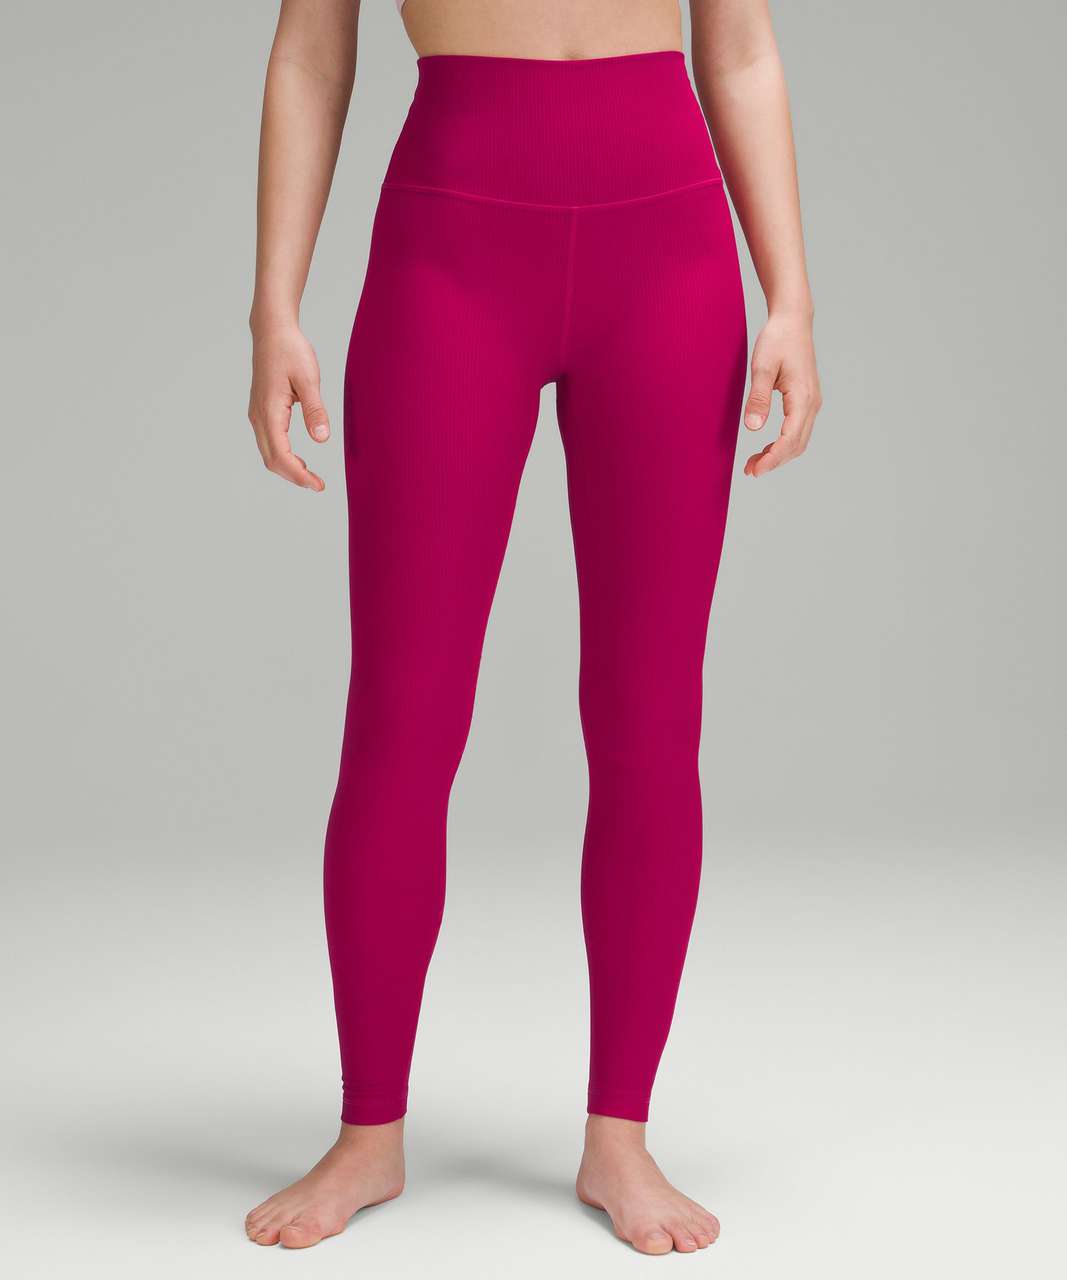 NEW LULULEMON Align 25 Pant 6 Ruby Red Berry Mauritius